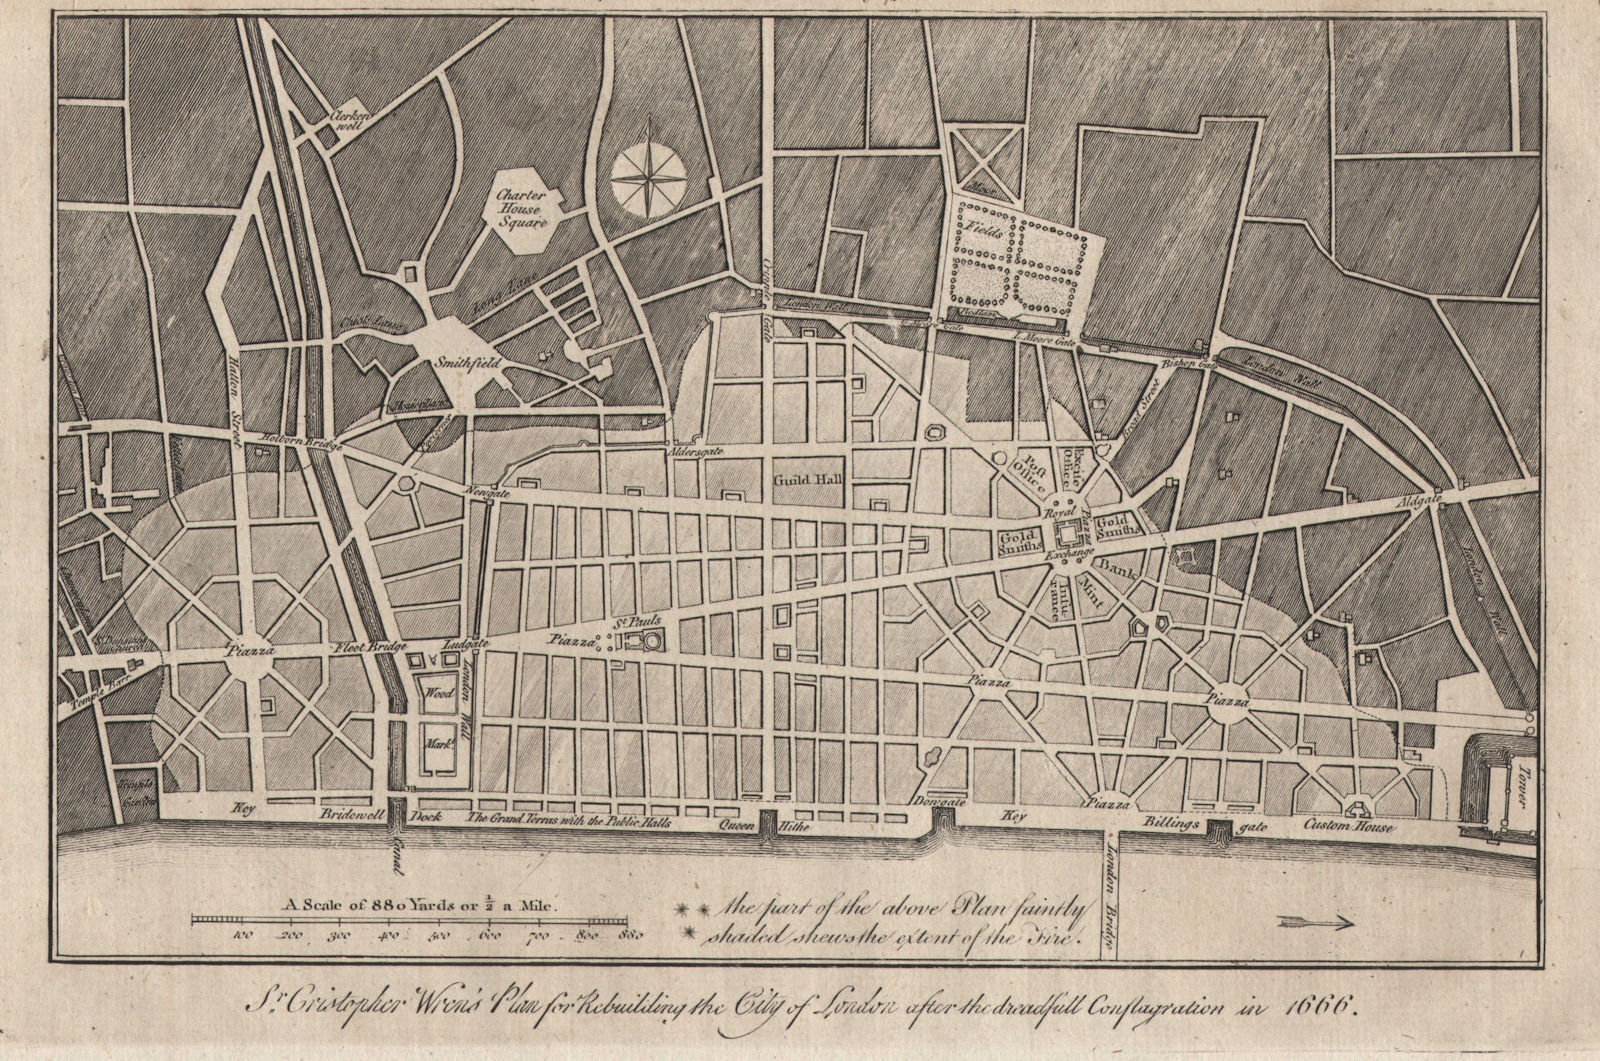 Sir Christopher Wren's plan for rebuilding the City of London. HARRISON 1776 map